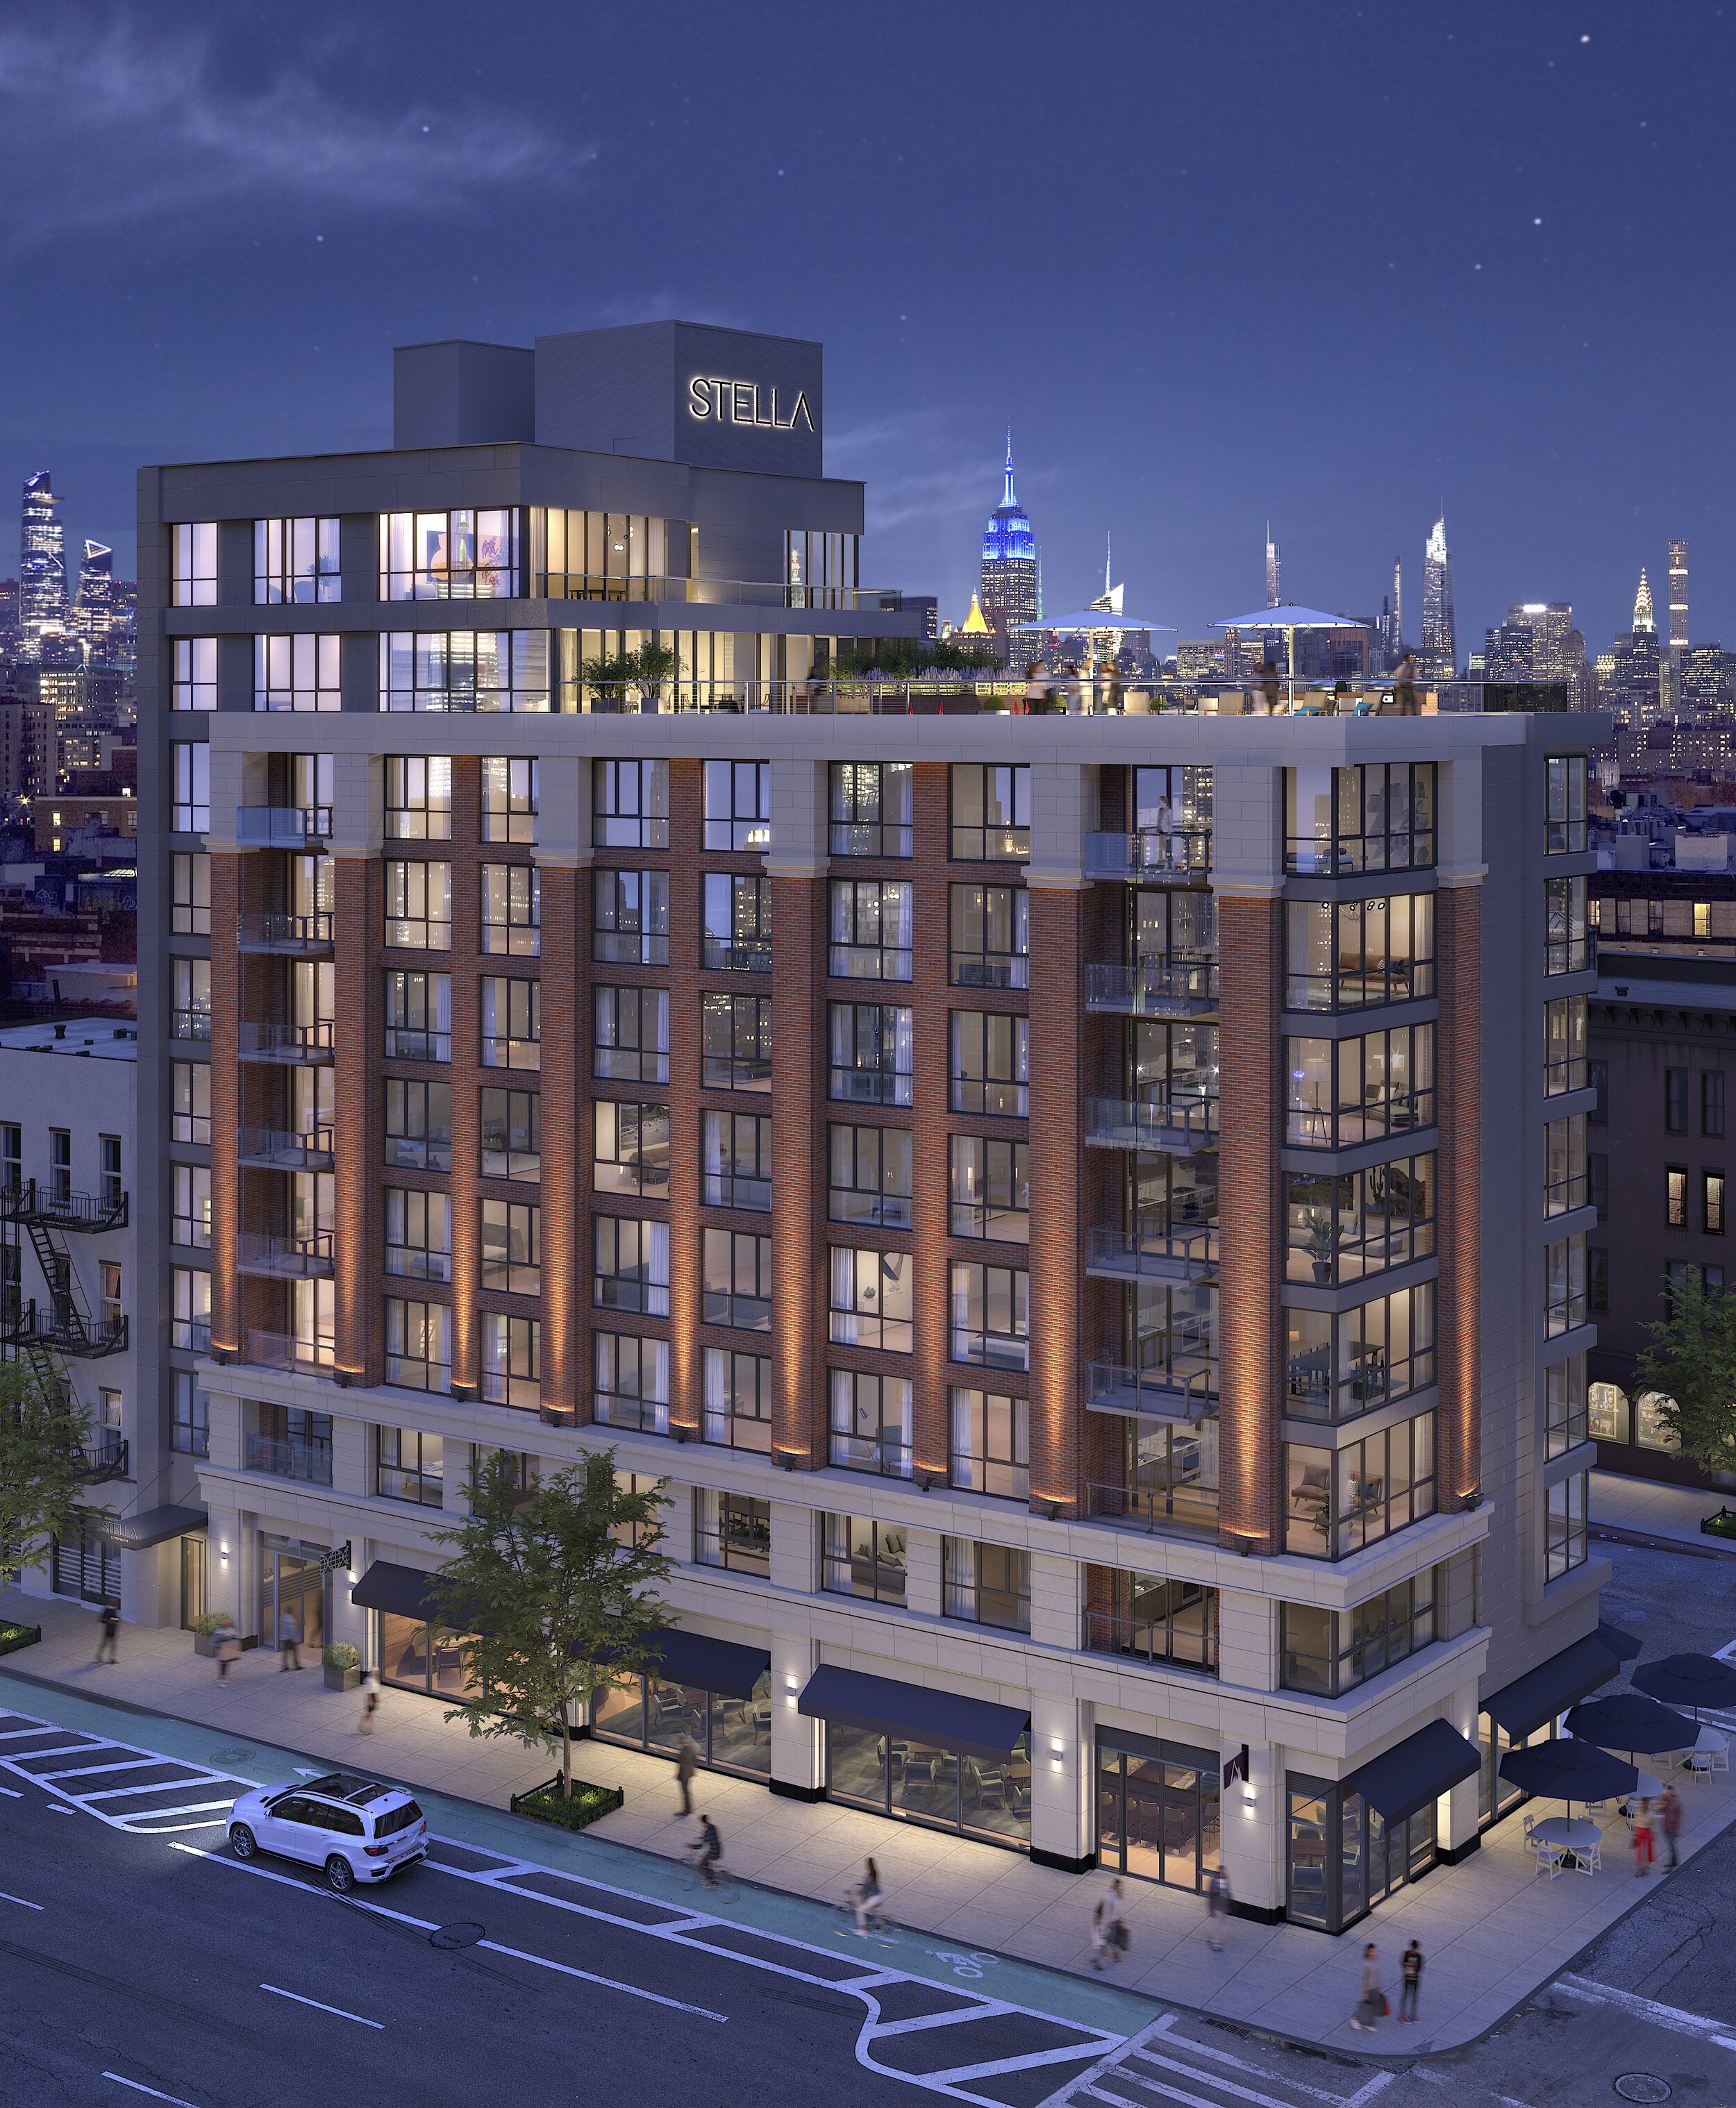  BLDG Management Co., Inc. and exclusive marketing agent, Corcoran New Development, are pleased to announce the launch of STELLA LES - a boutique luxury rental building that features a “club inspired” amenity offering.&nbsp; Located at 251 East 2nd&n